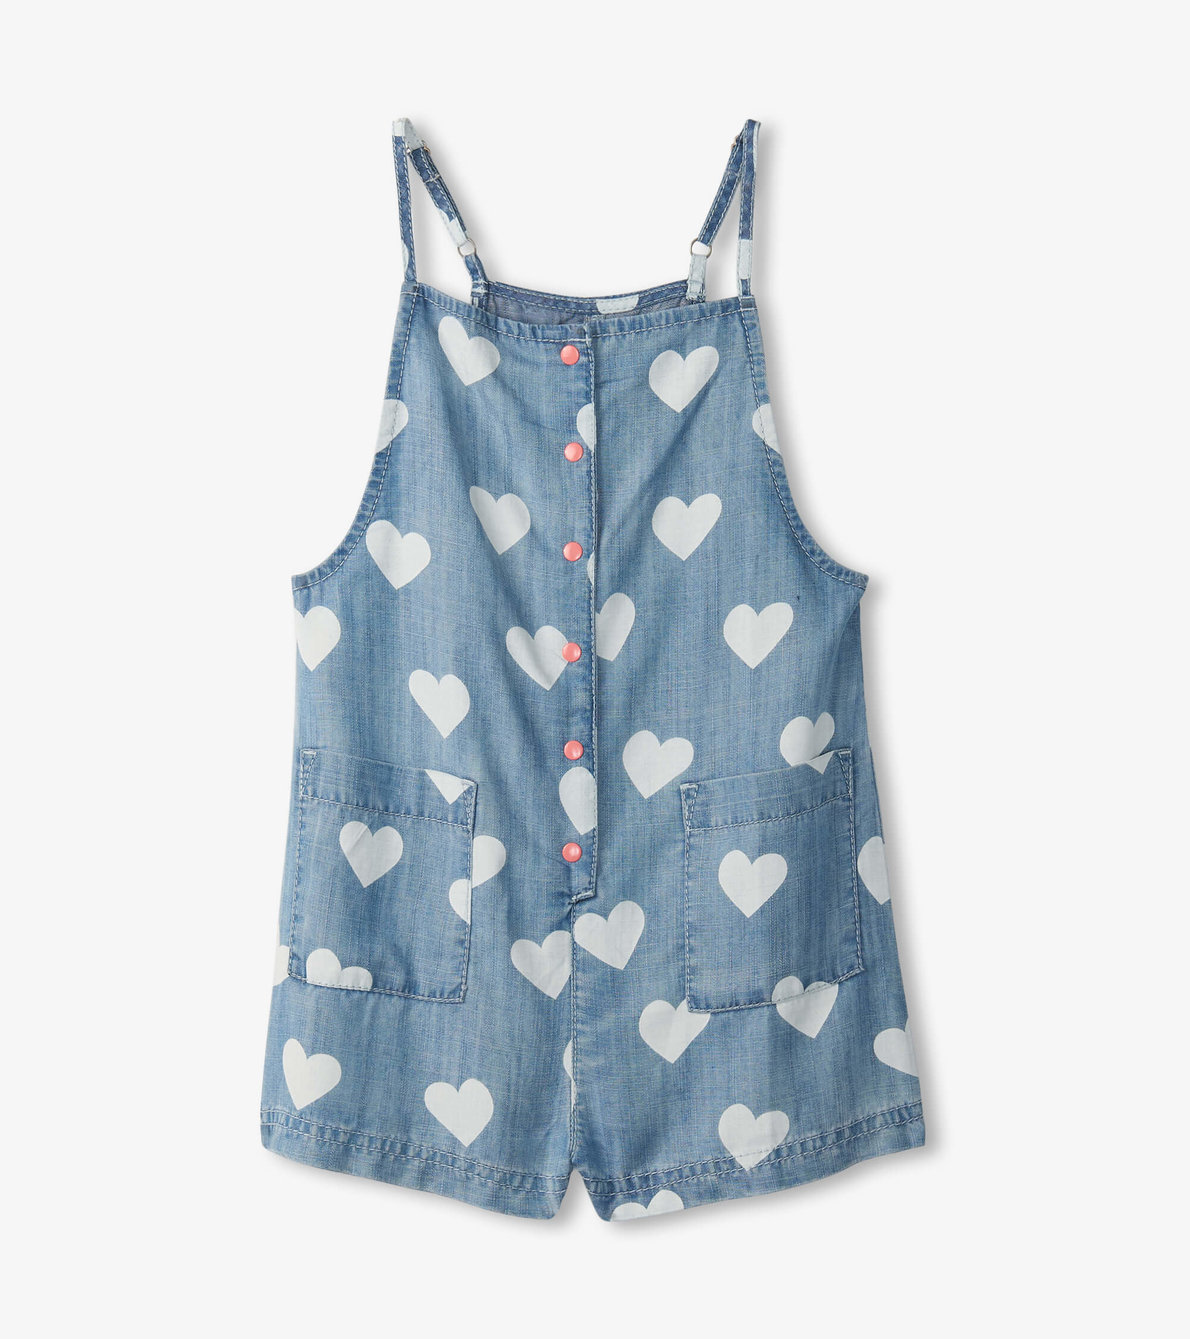 View larger image of Girls Hearts Slouchy Overalls